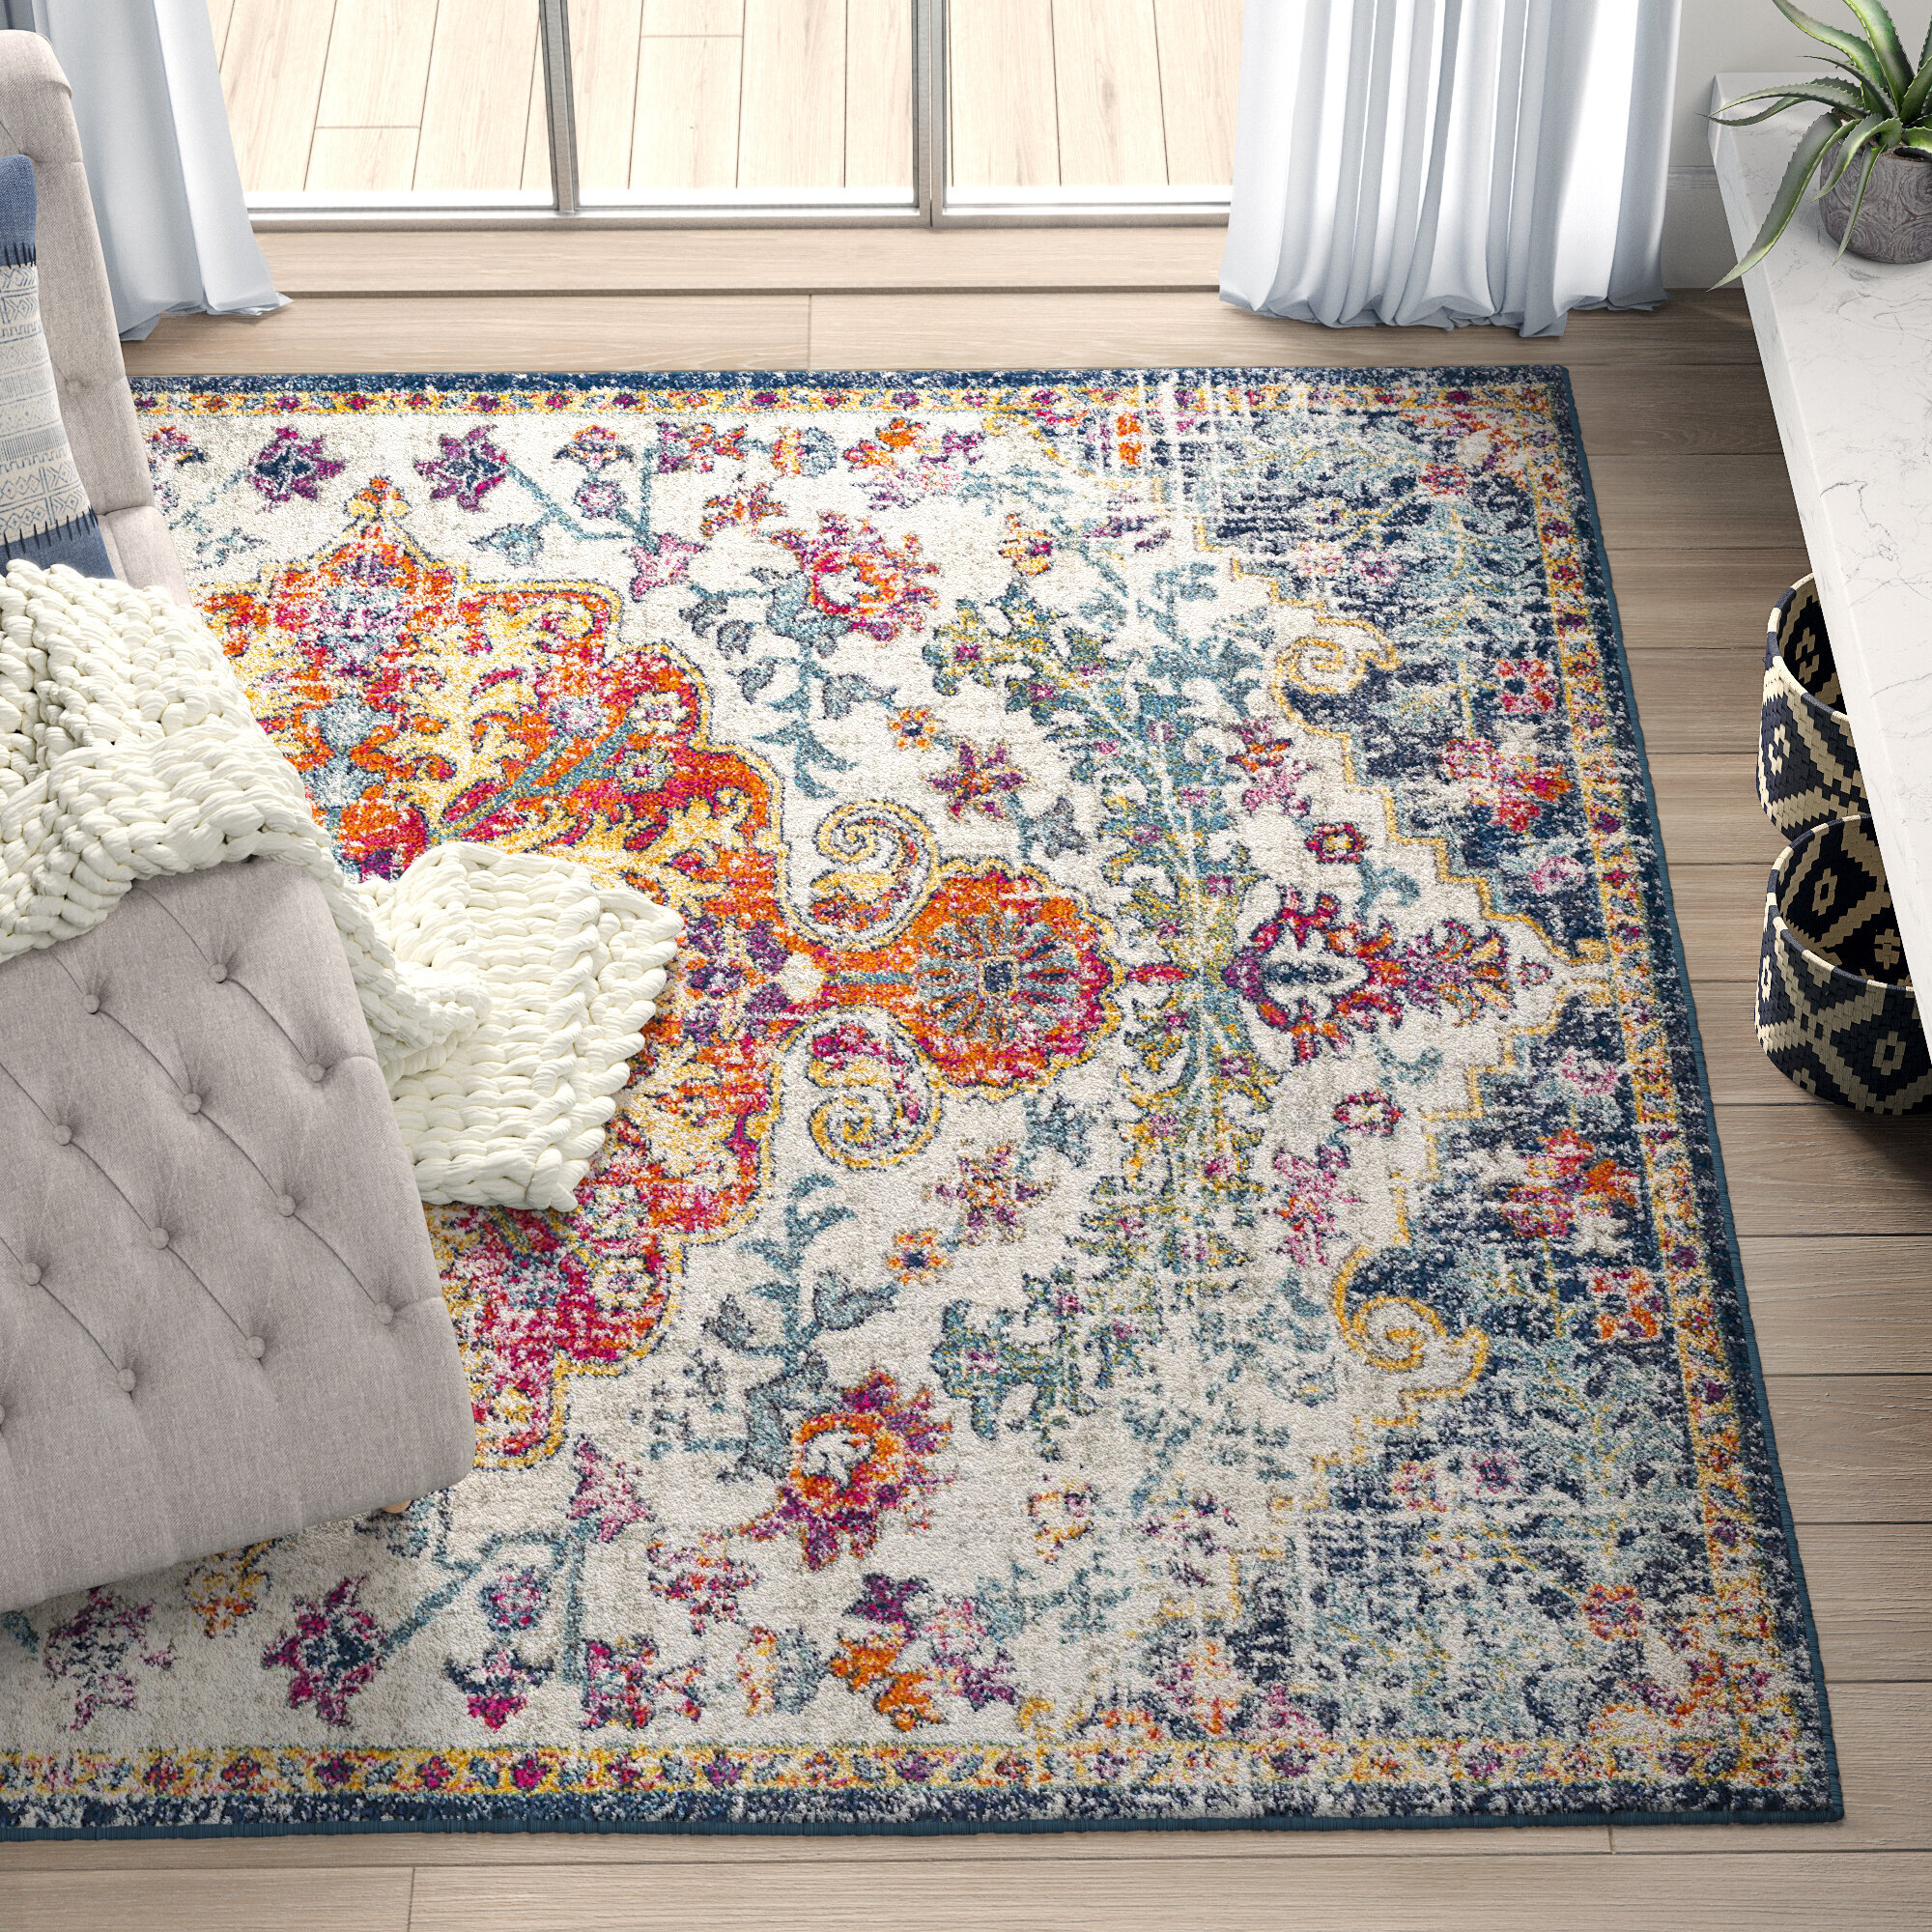 SUPERIOR Conventry Traditional Oriental Abstract Floral Polypropylene Indoor Area Rug 4x6 Beige 